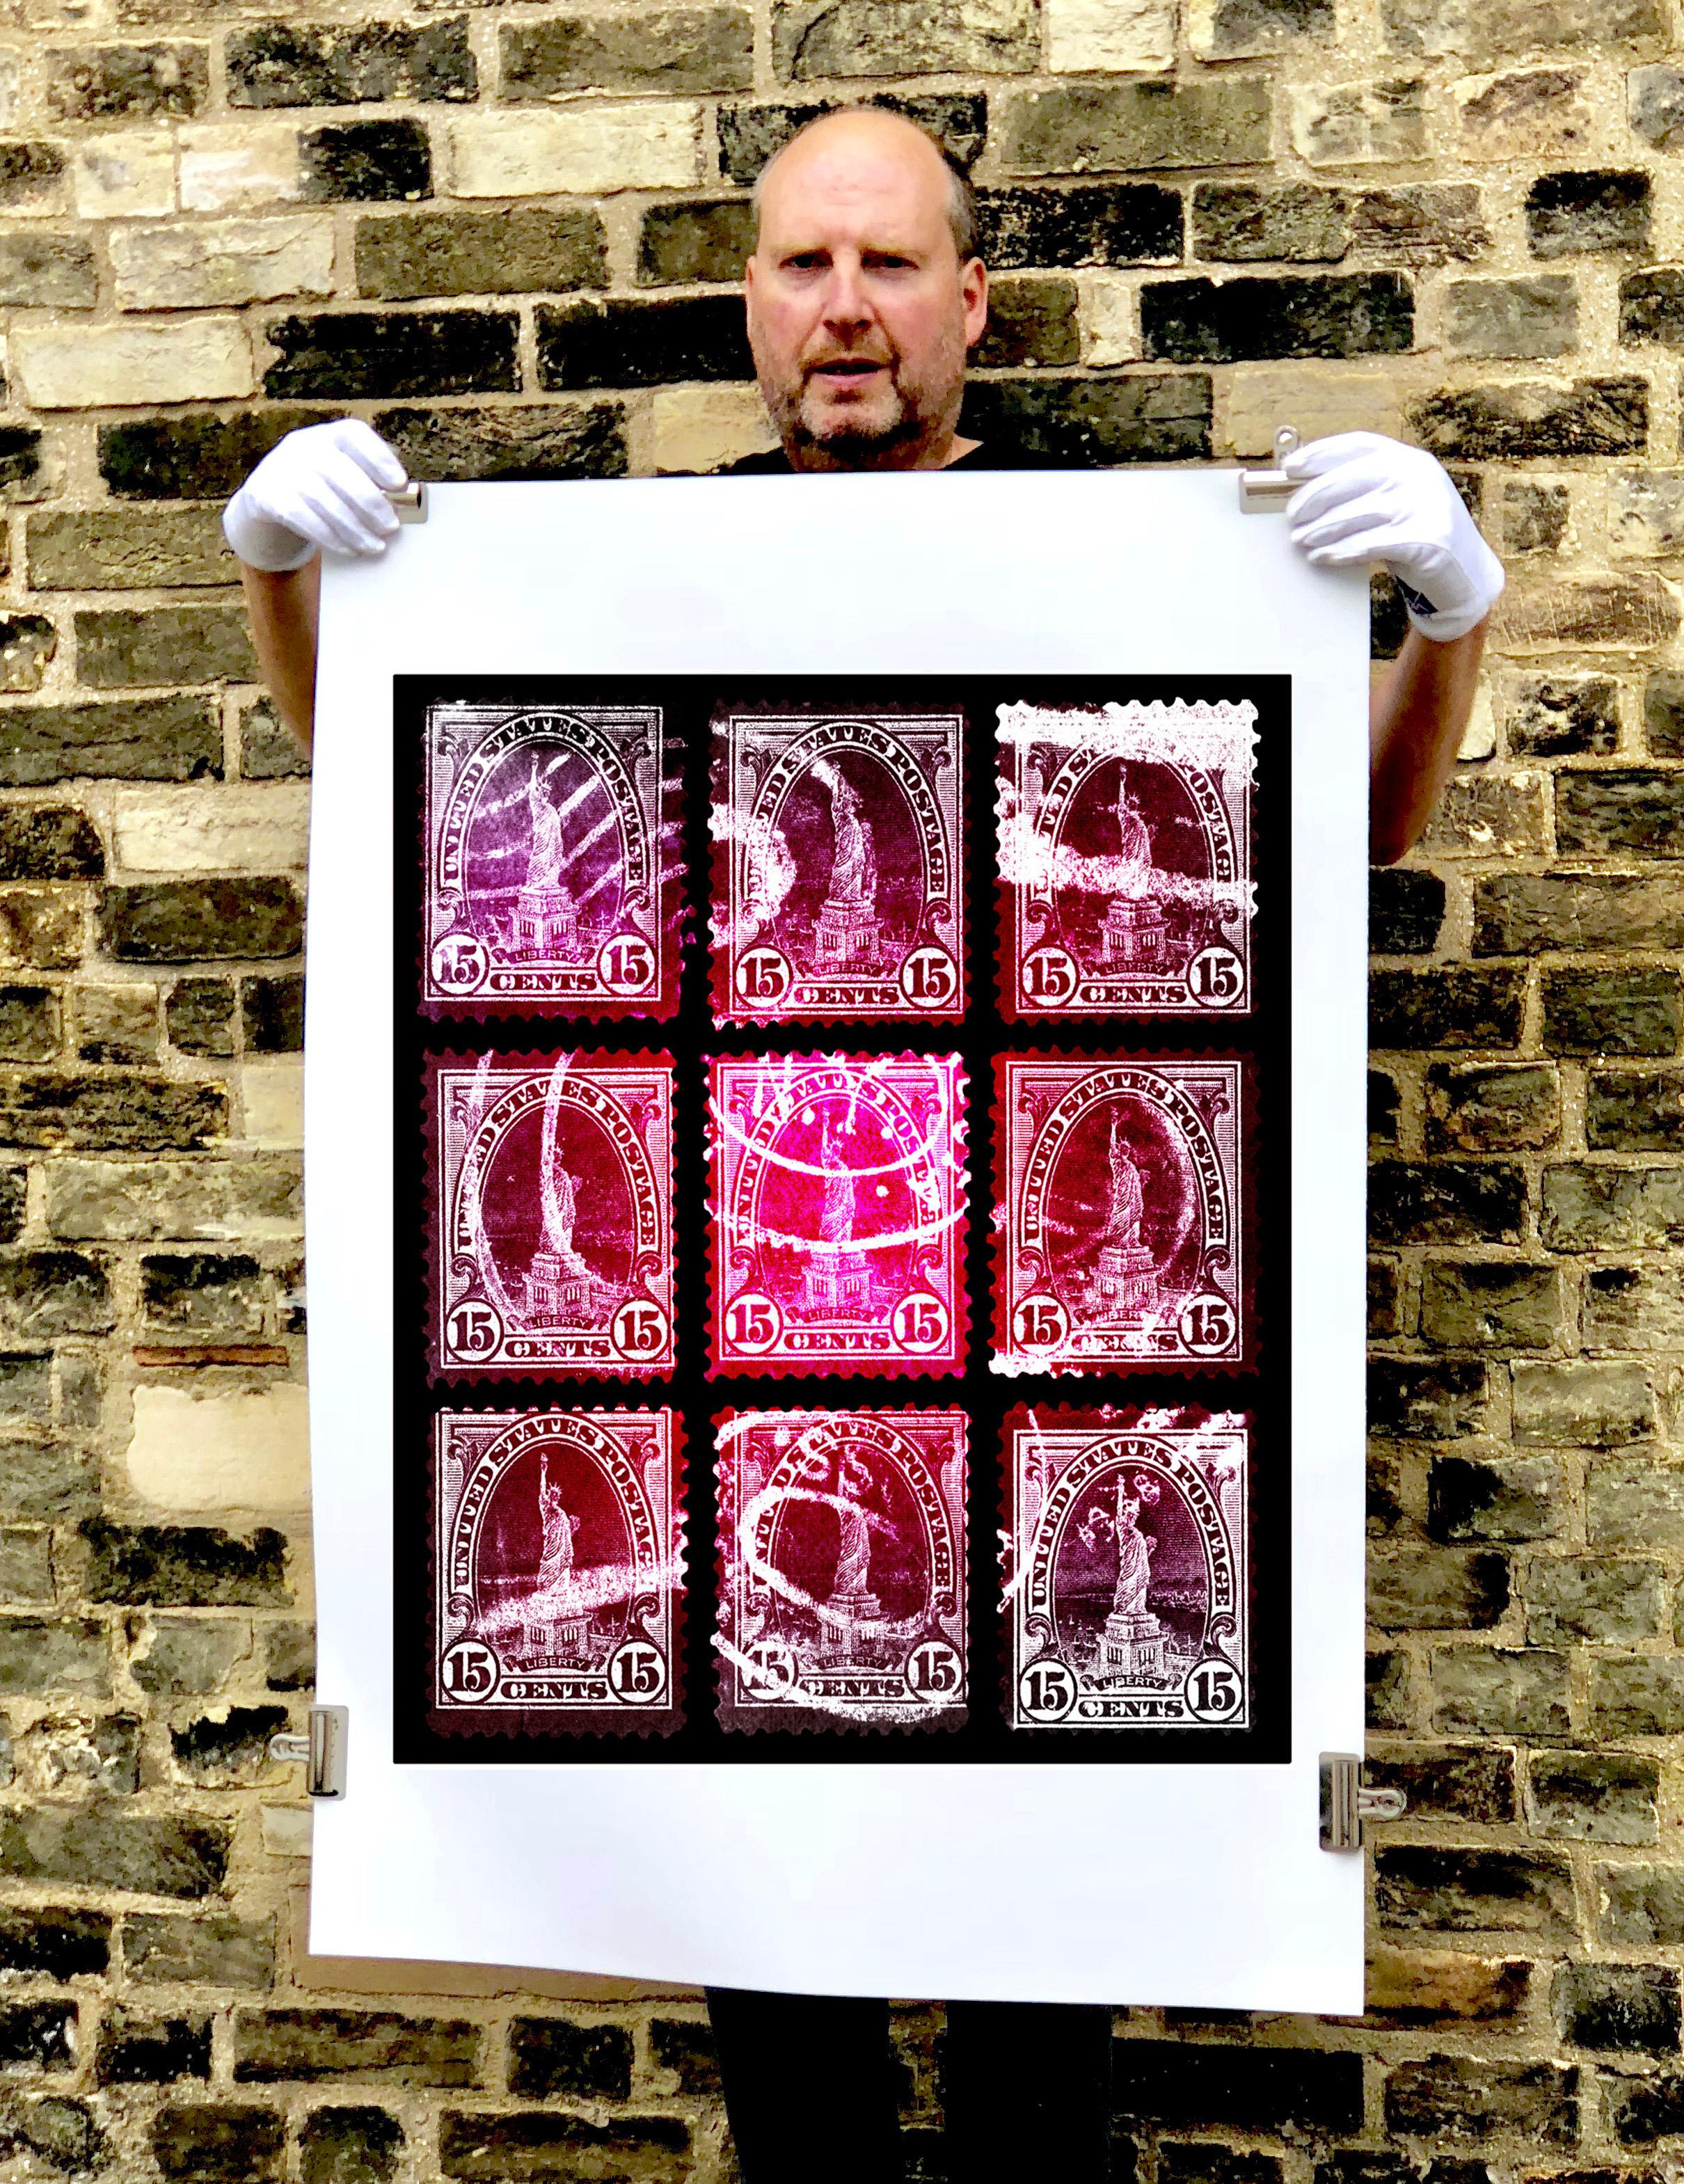 Liberty Mosiac, from the Heidler & Heeps American Stamp Collection, these historic postage stamps are given a twenty-first century pop art lease of life.

This artwork is a limited edition of 25, gloss photographic print, dry-mounted to aluminium,